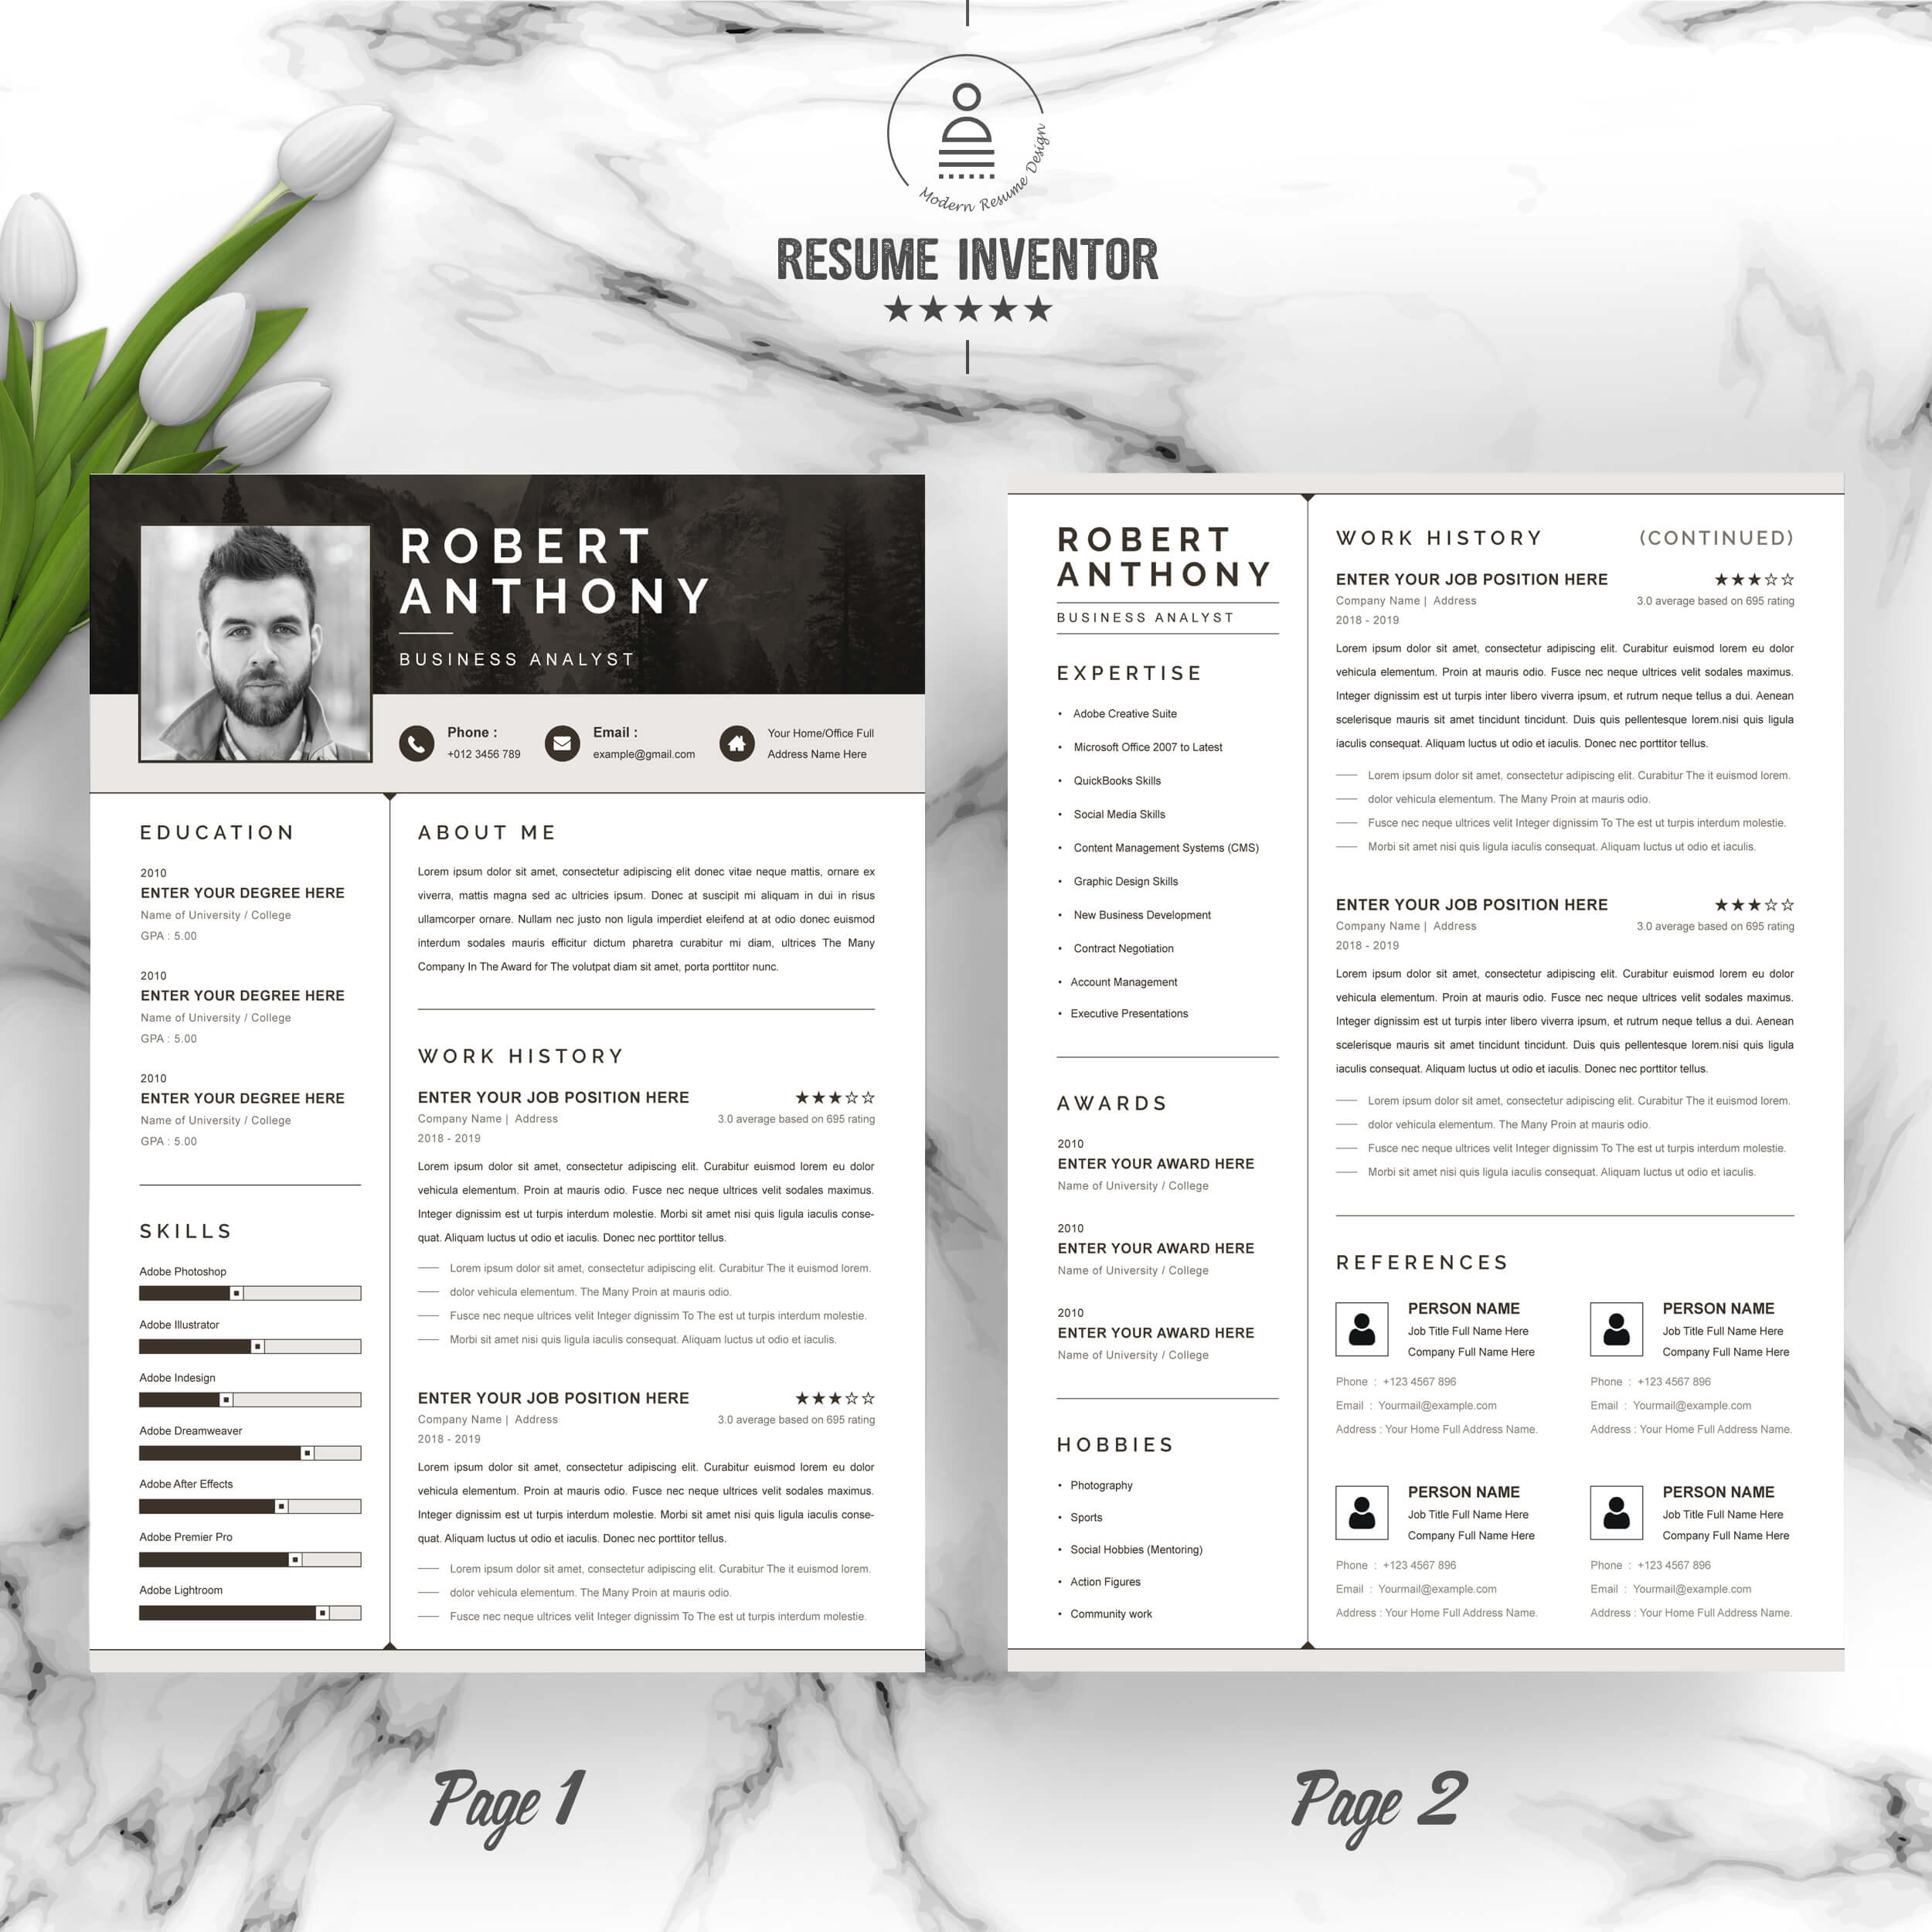 Business Analyst Resume Template | Resume Template in Word PSD Format preview image.